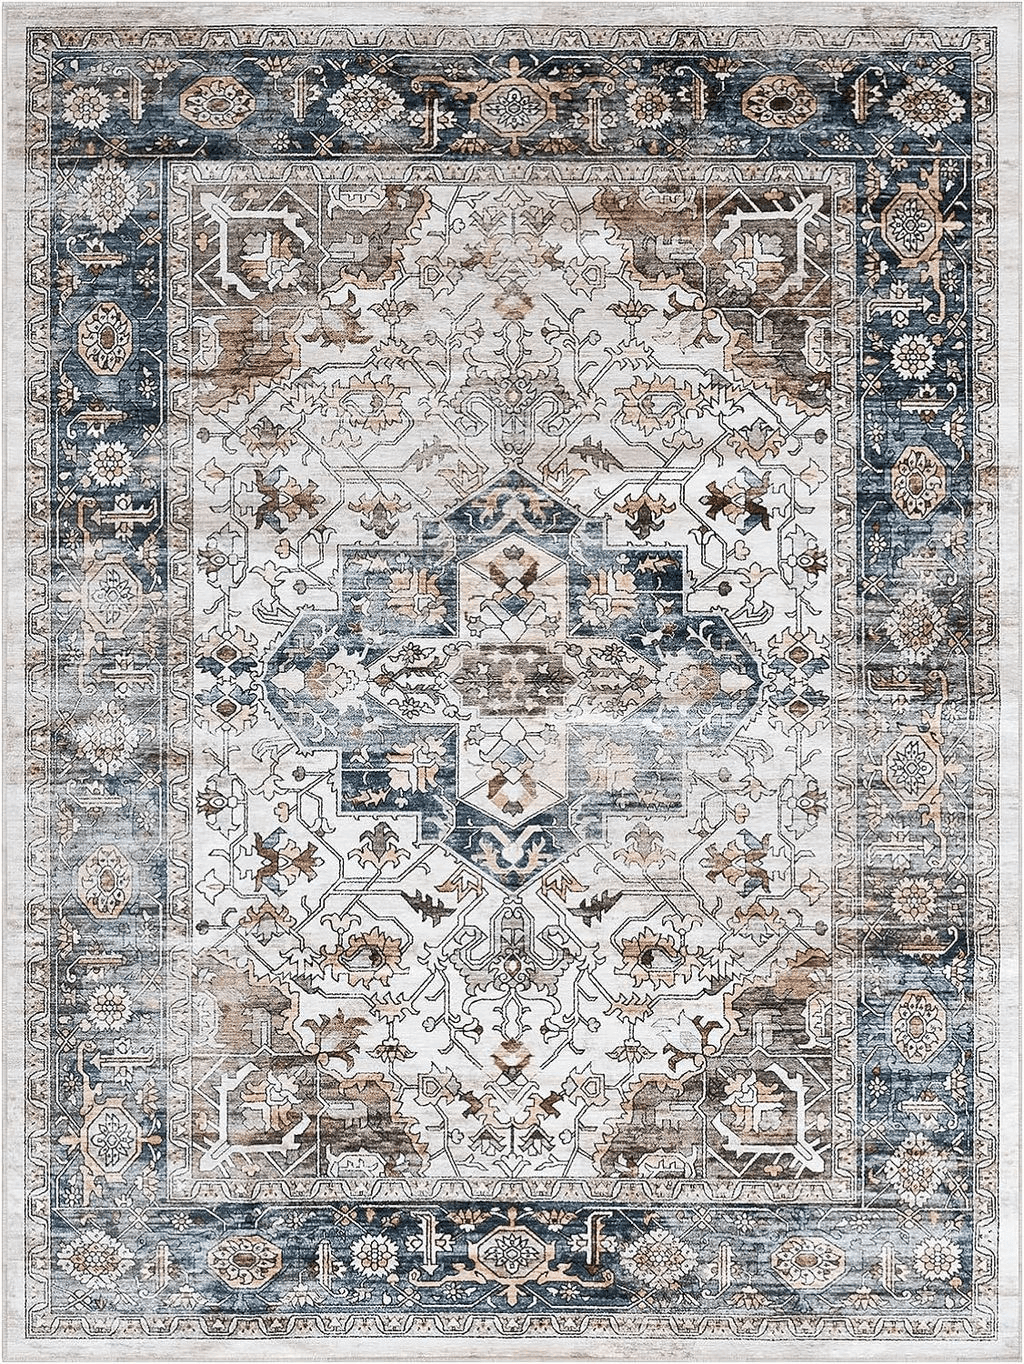 9x12 Area Rugs for Living Room: Washable Rugs Carpet for Living Room with Non-Slip Backing Non-Shedding Stain Resistant, Boho Floral Large Rugs for Dining Room Nursery Home Office (Blue Multi)